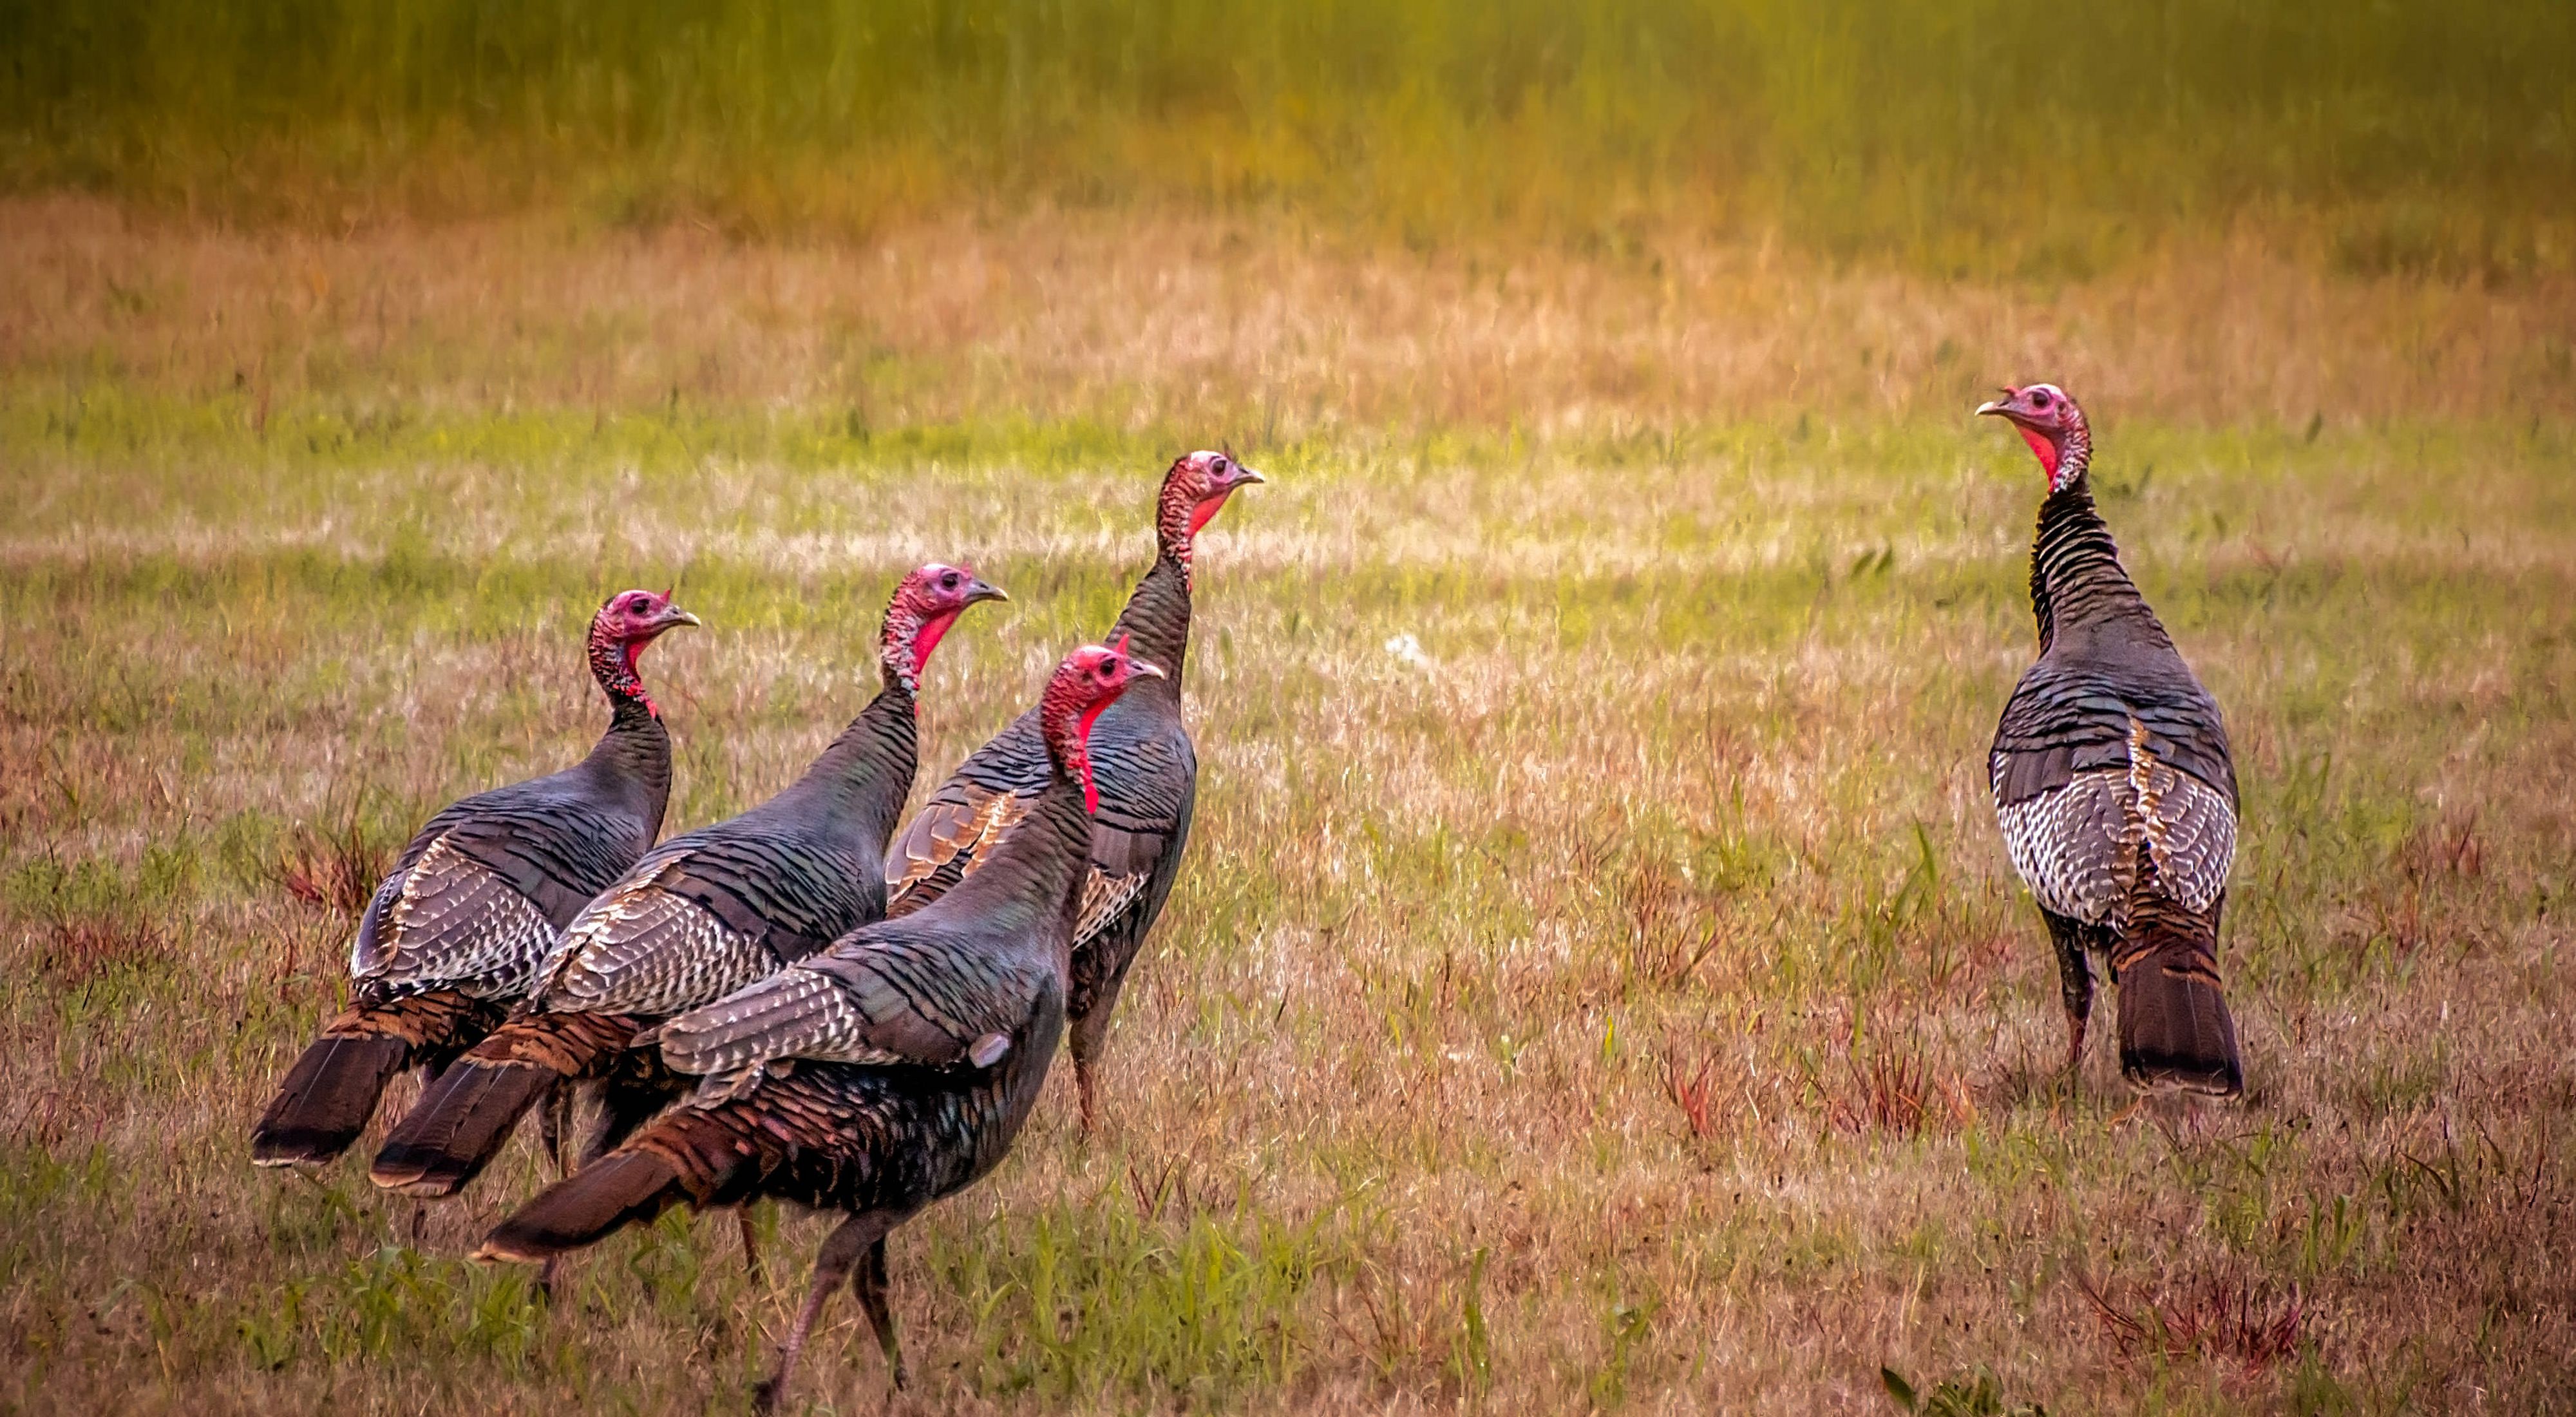 Group of 4 turkeys in a field looks at another lone turkey.